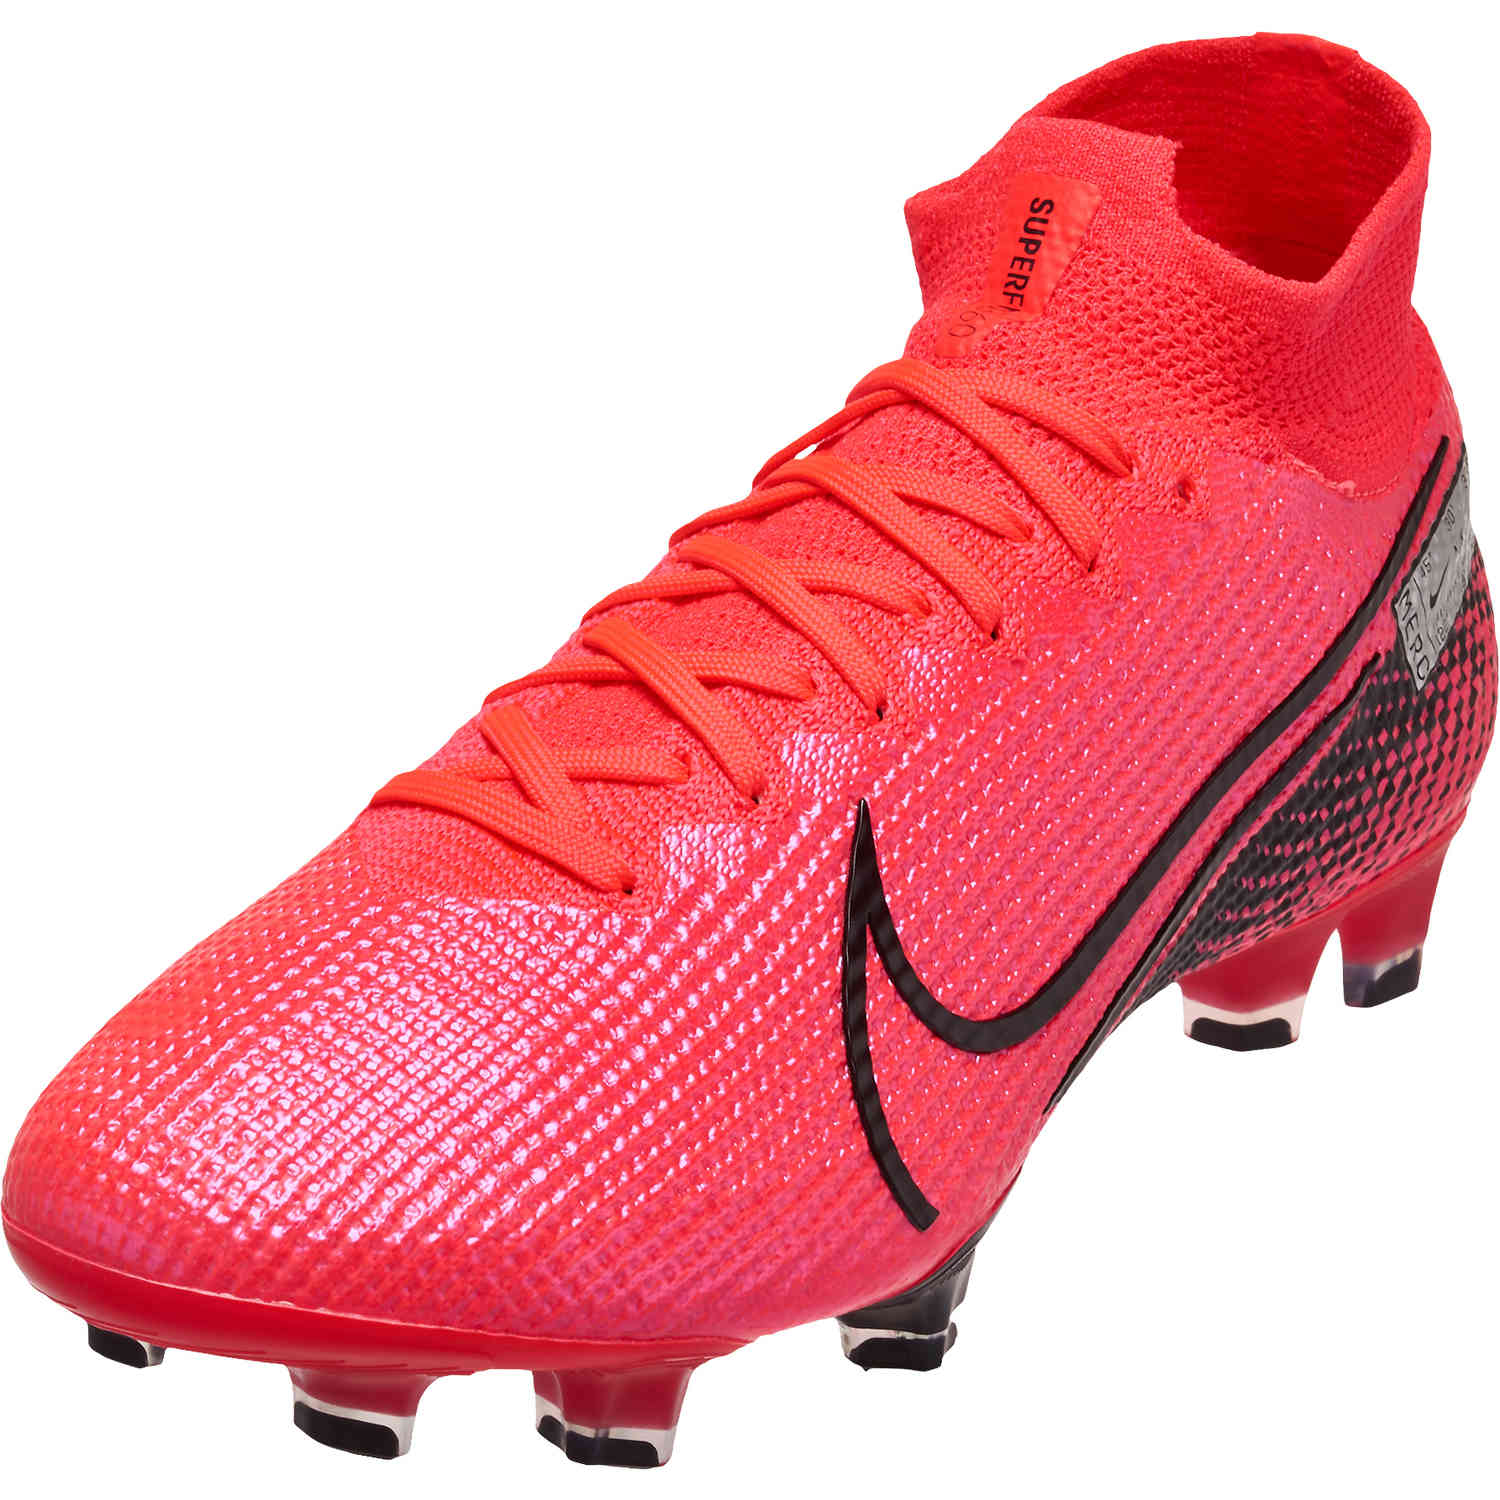 New football boots elite soccer shoes High Top FG super-fly 7 